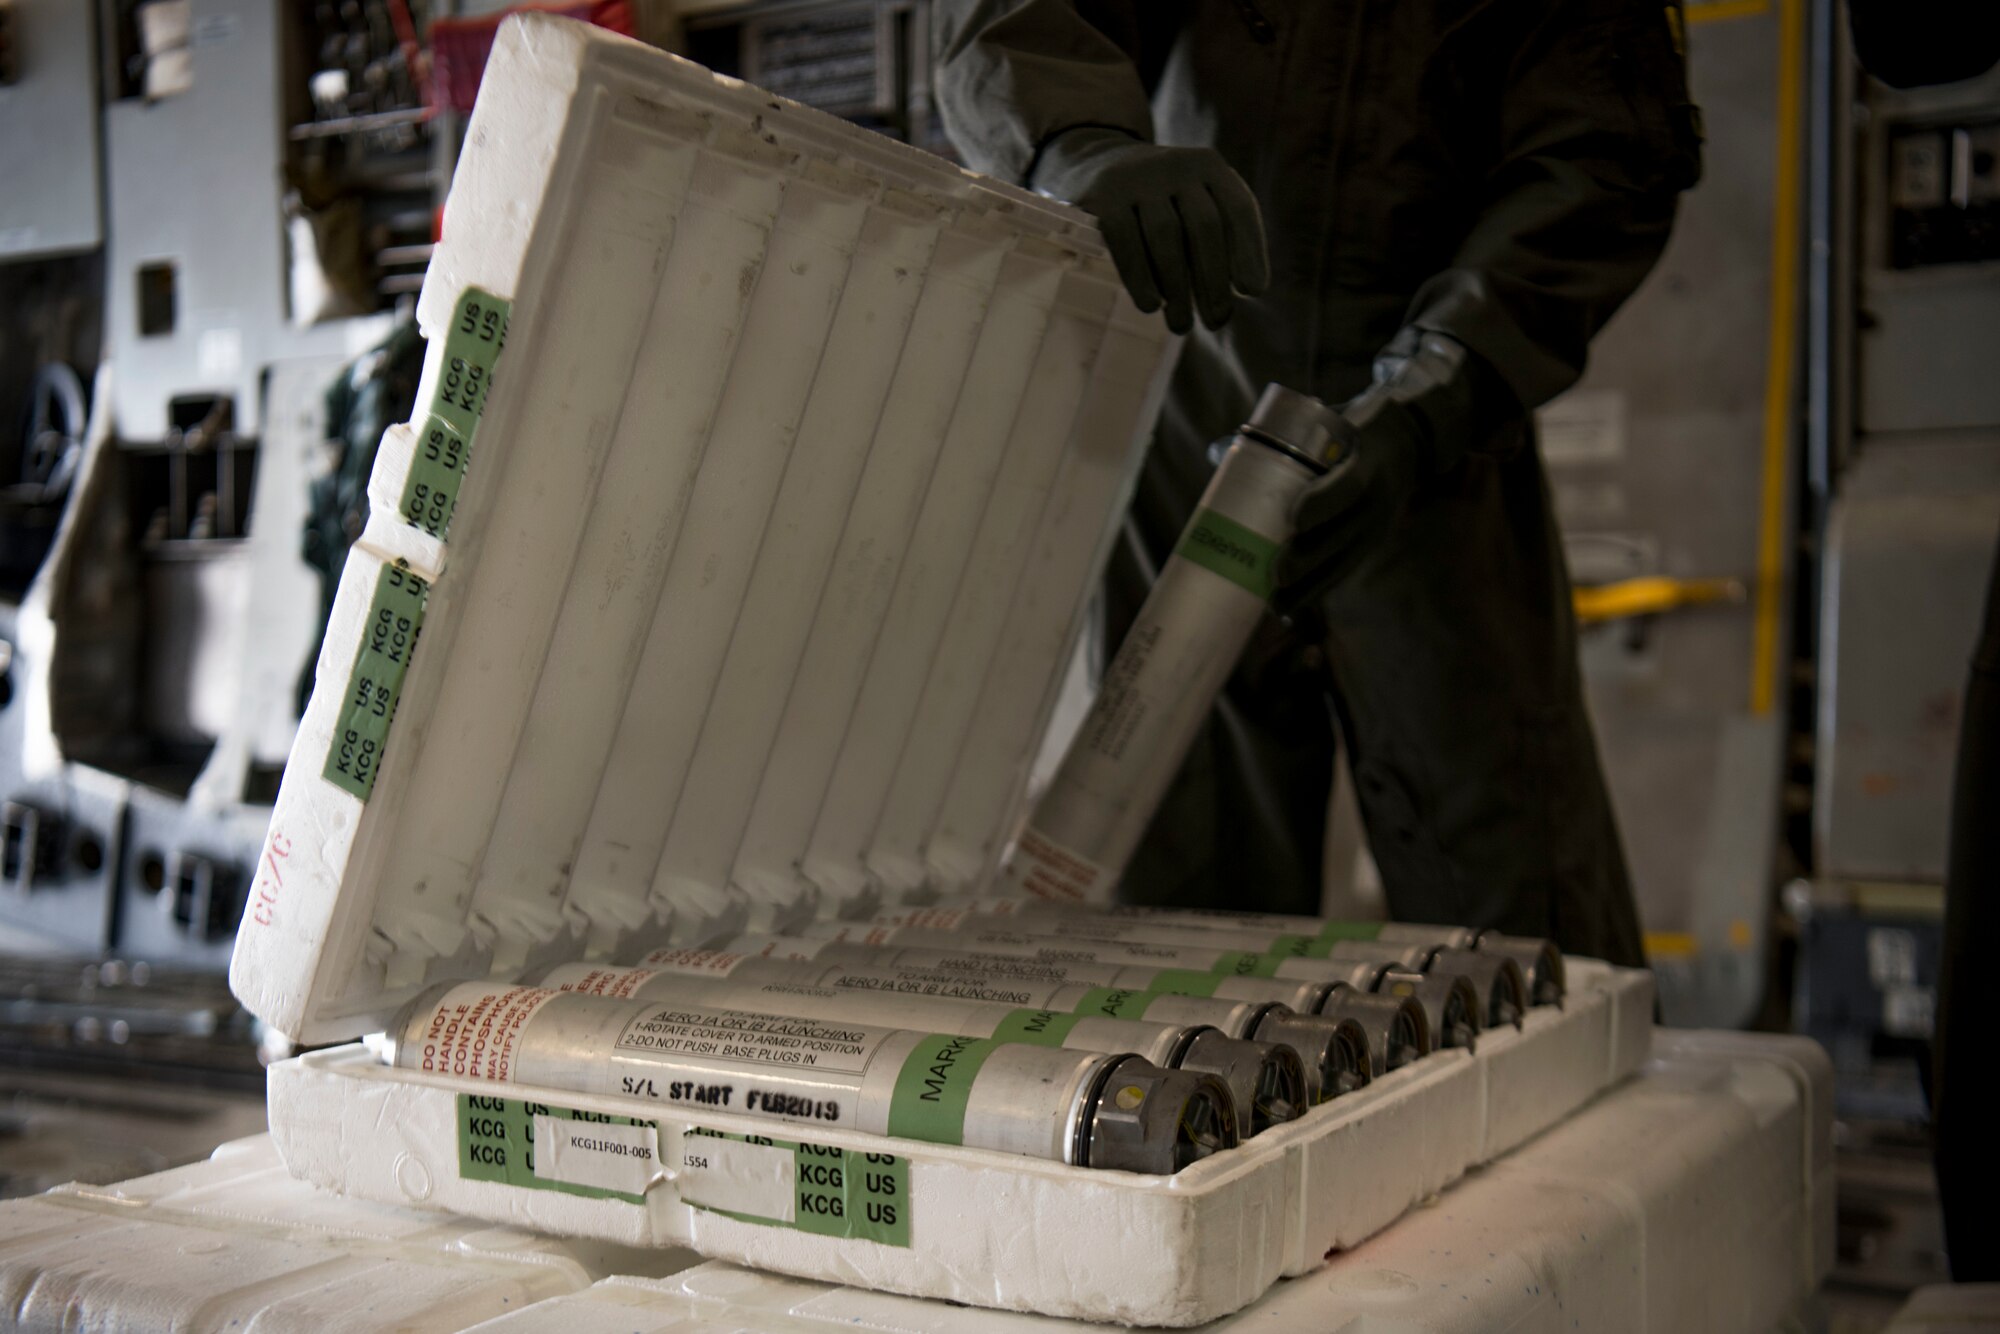 A loadmaster examines a crate of maritime position markers onboard a C-17 Globemaster III from Joint Base Charleston during Air Mobility Command Test and Evaluation Squadron’s assessment of tactics, techniques and procedures for astronaut rescue and recovery efforts Jan. 22, 2020, at Patrick Air Force Base, Fla.